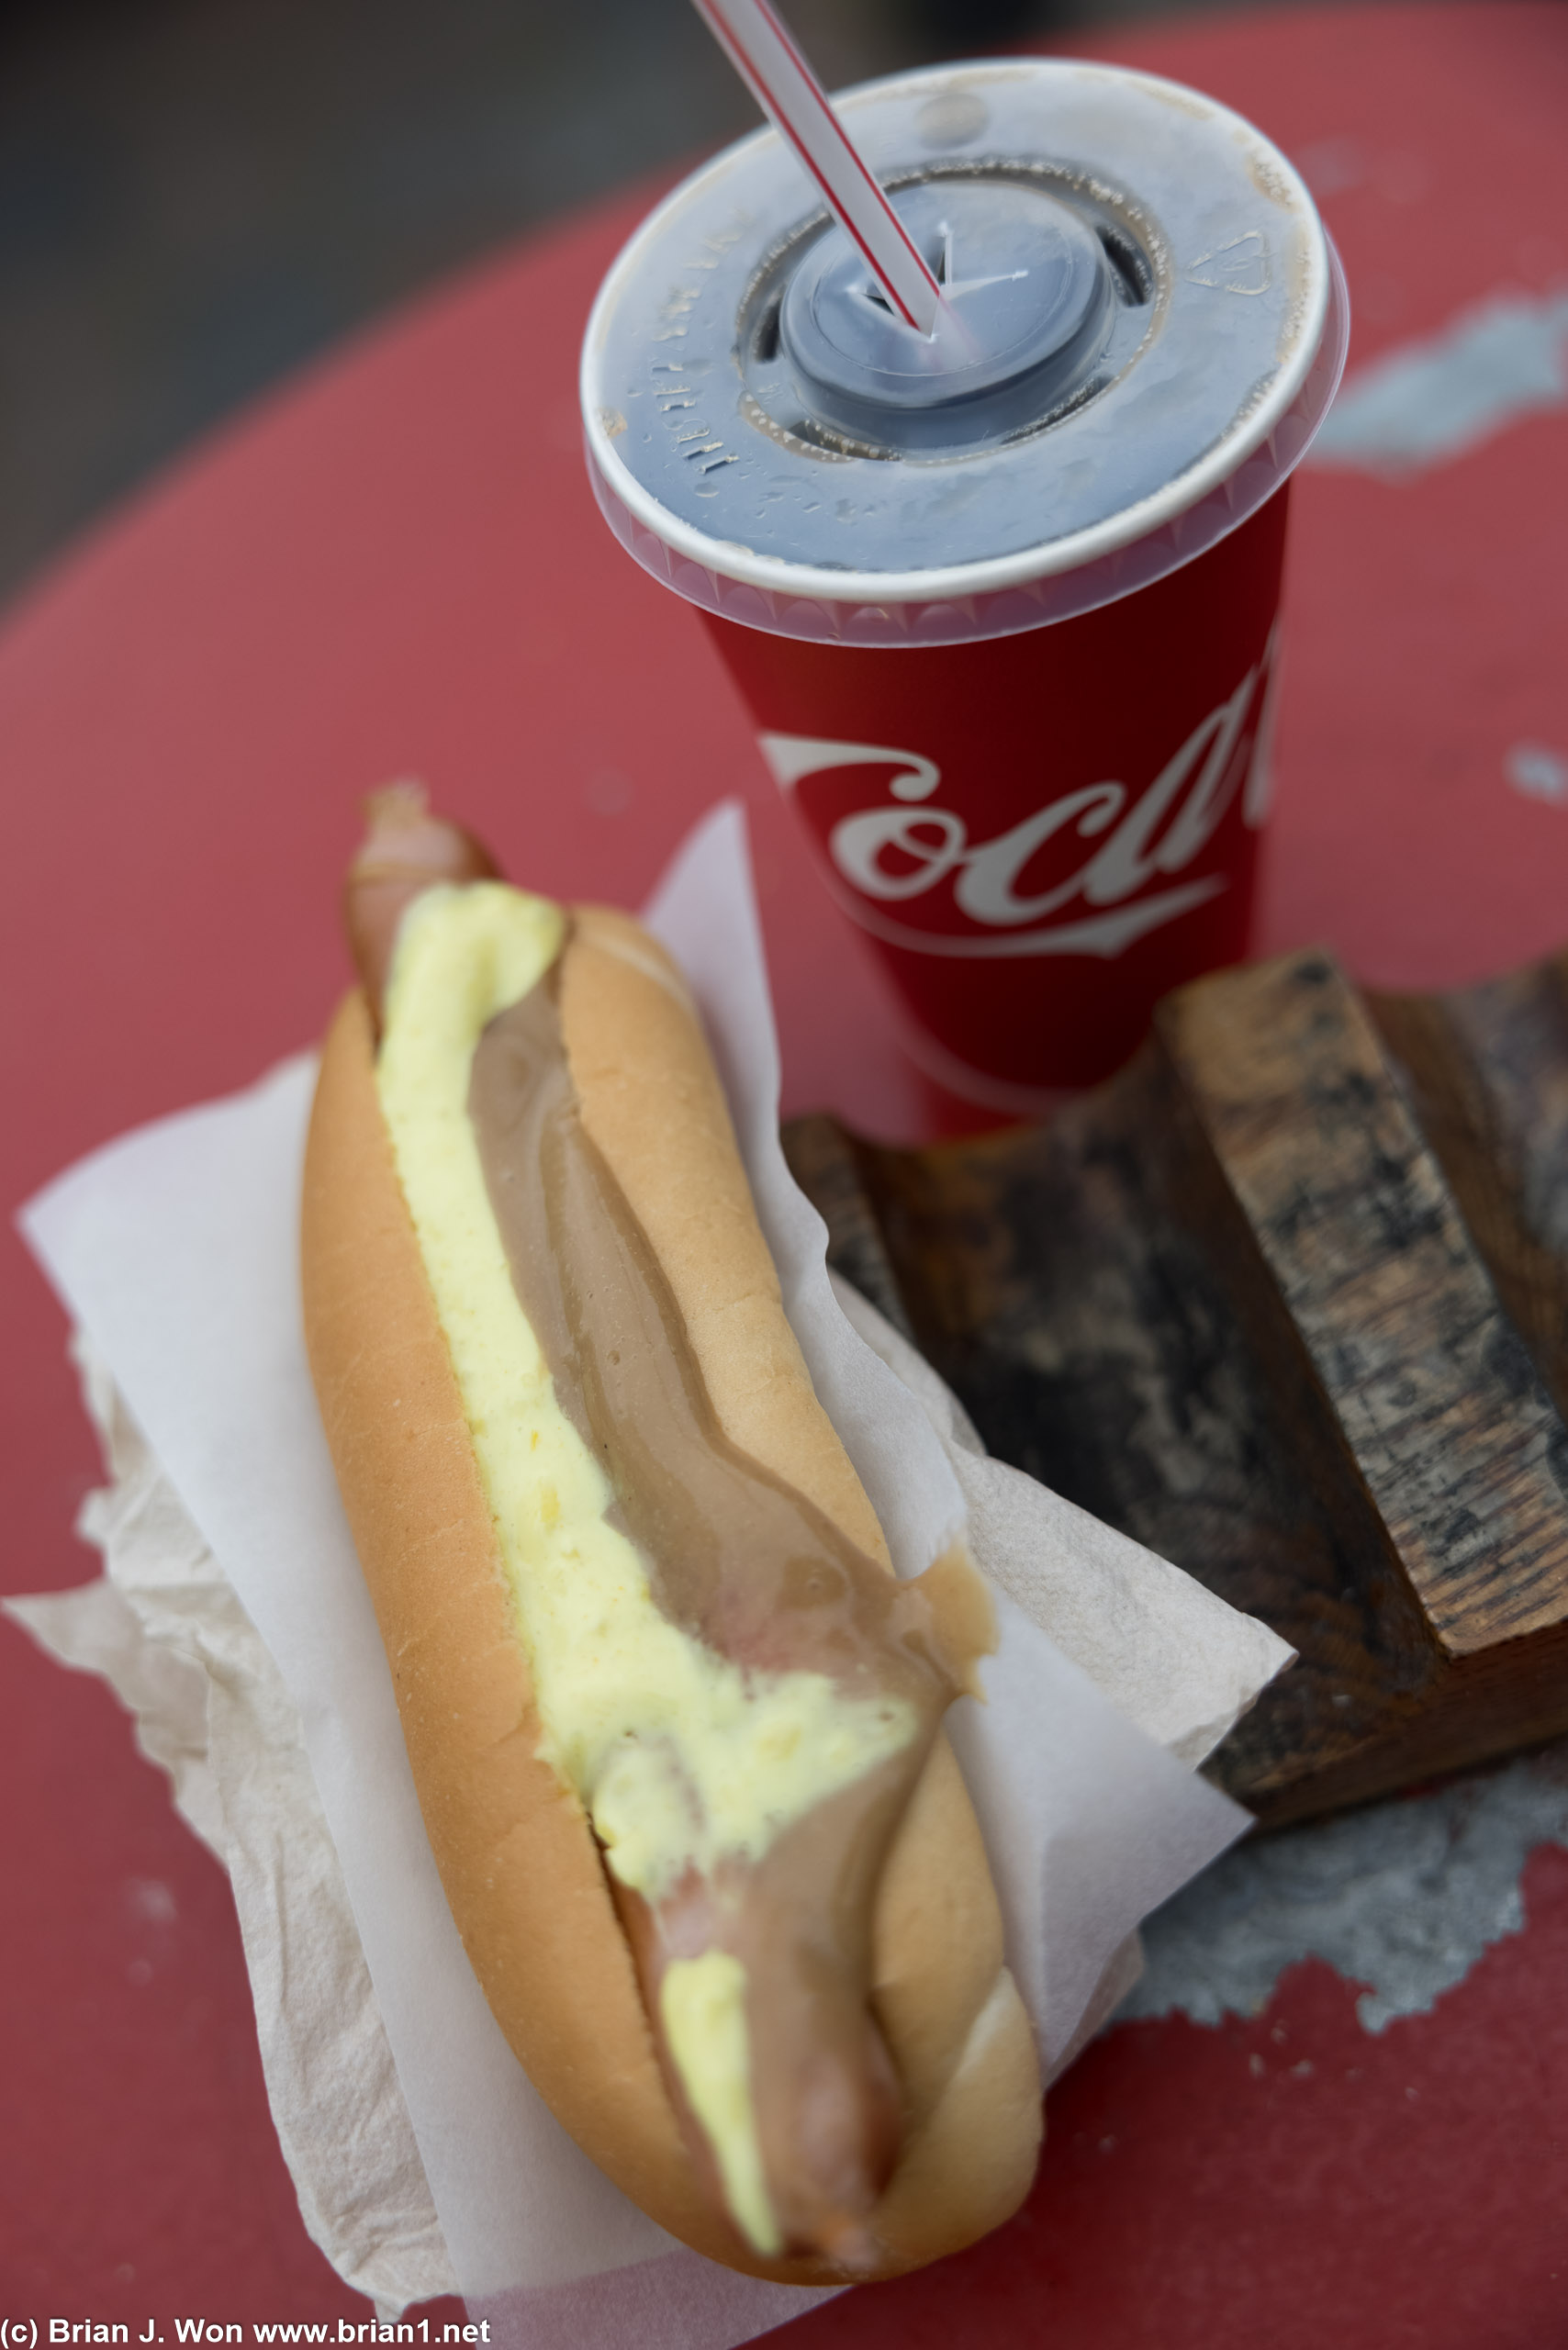 Hot dog and soda, ISK 850 ($6.72).